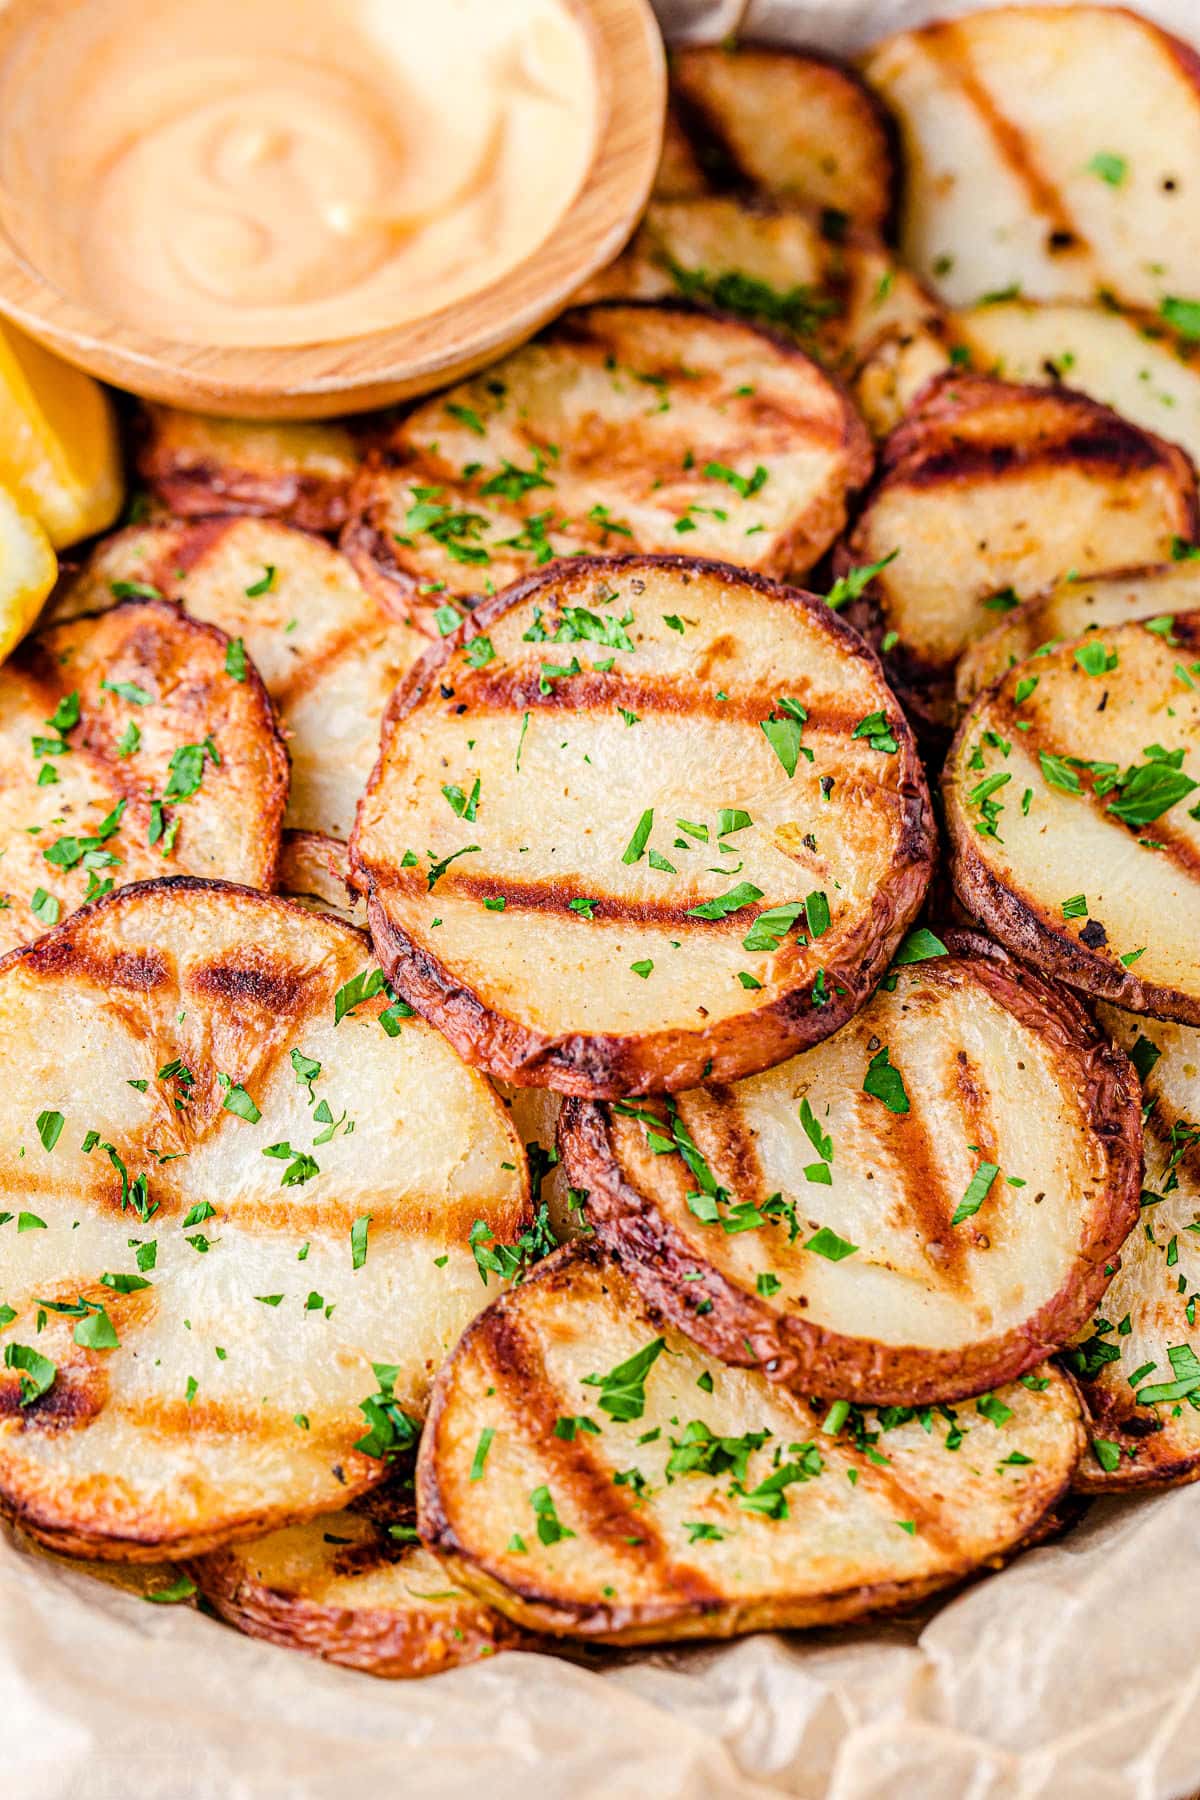 potatoes with grill marks cut into slices.